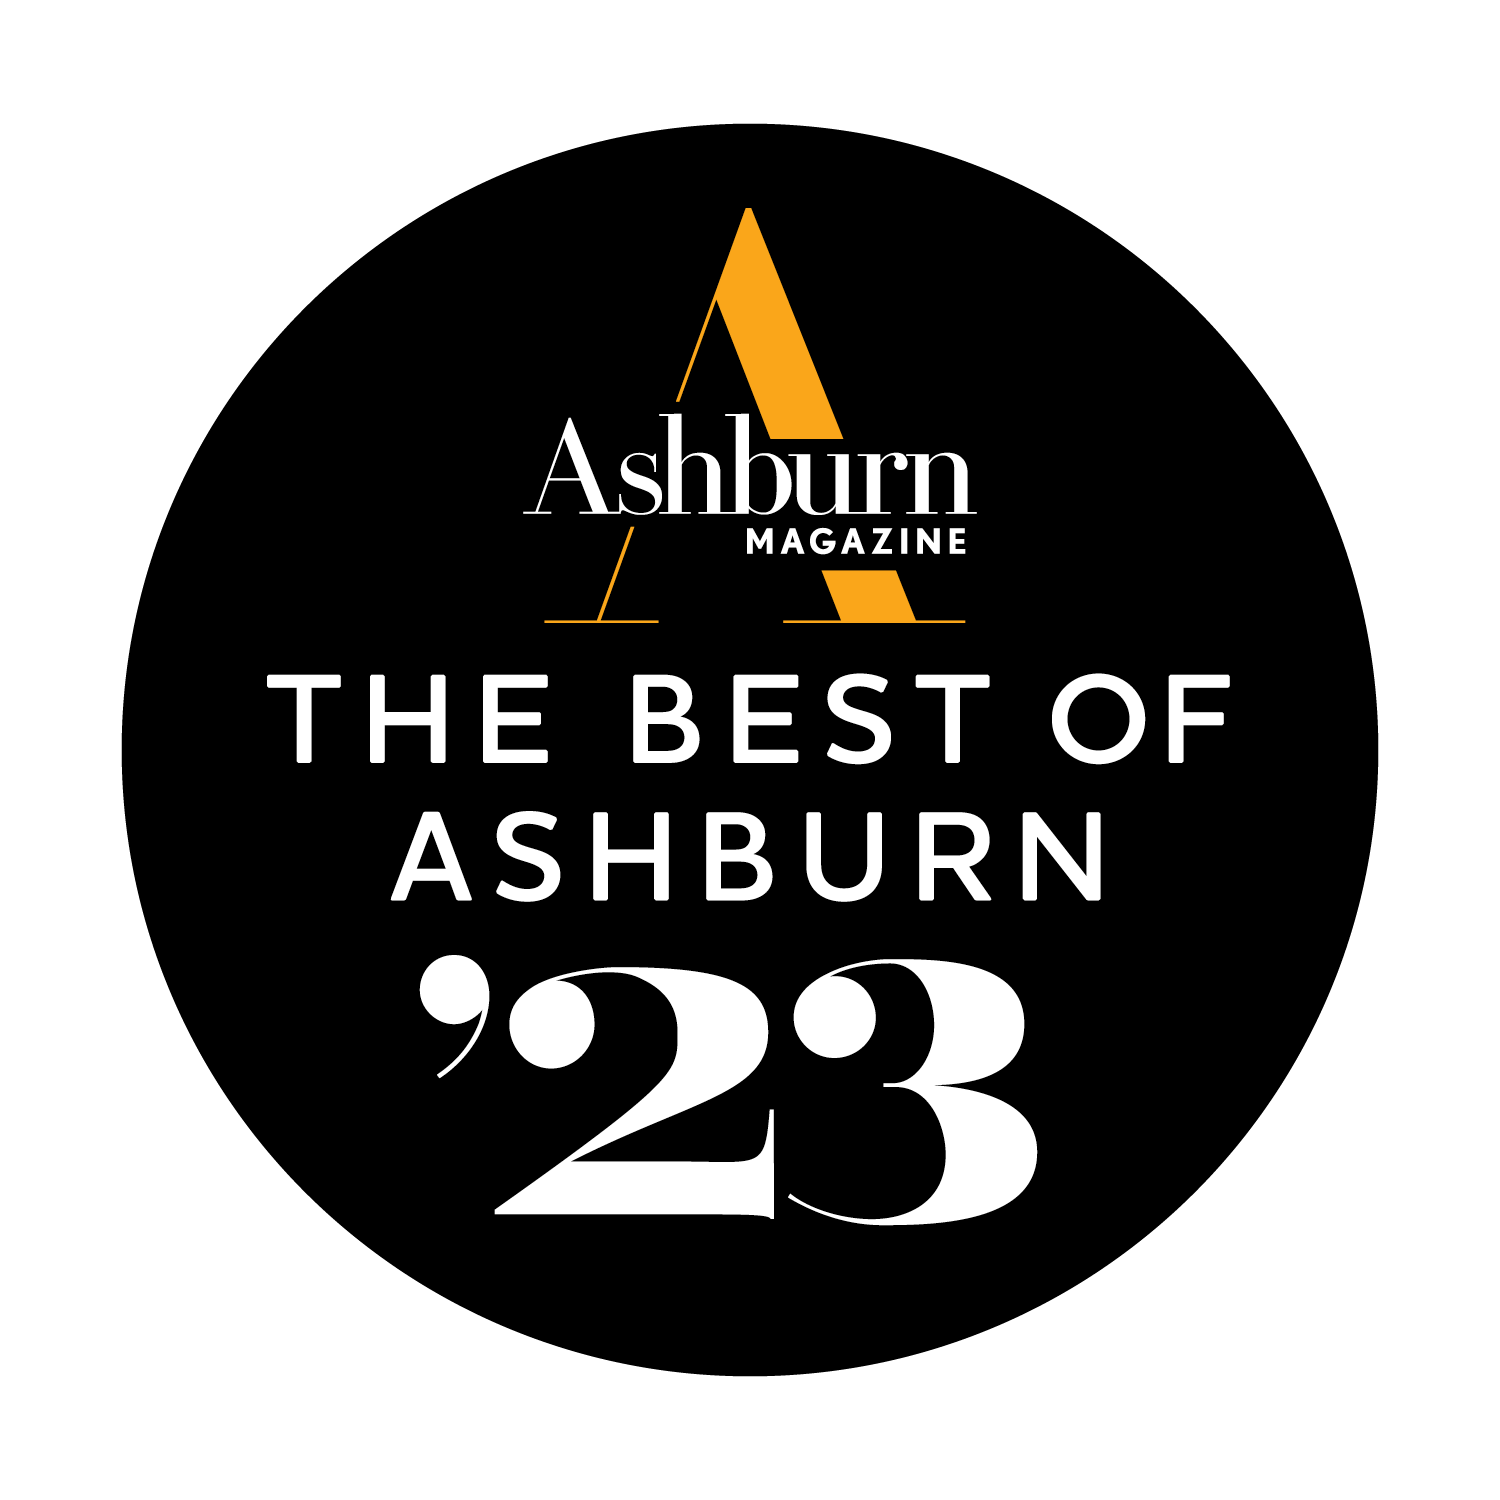 Voted Best of Ashburn 2022